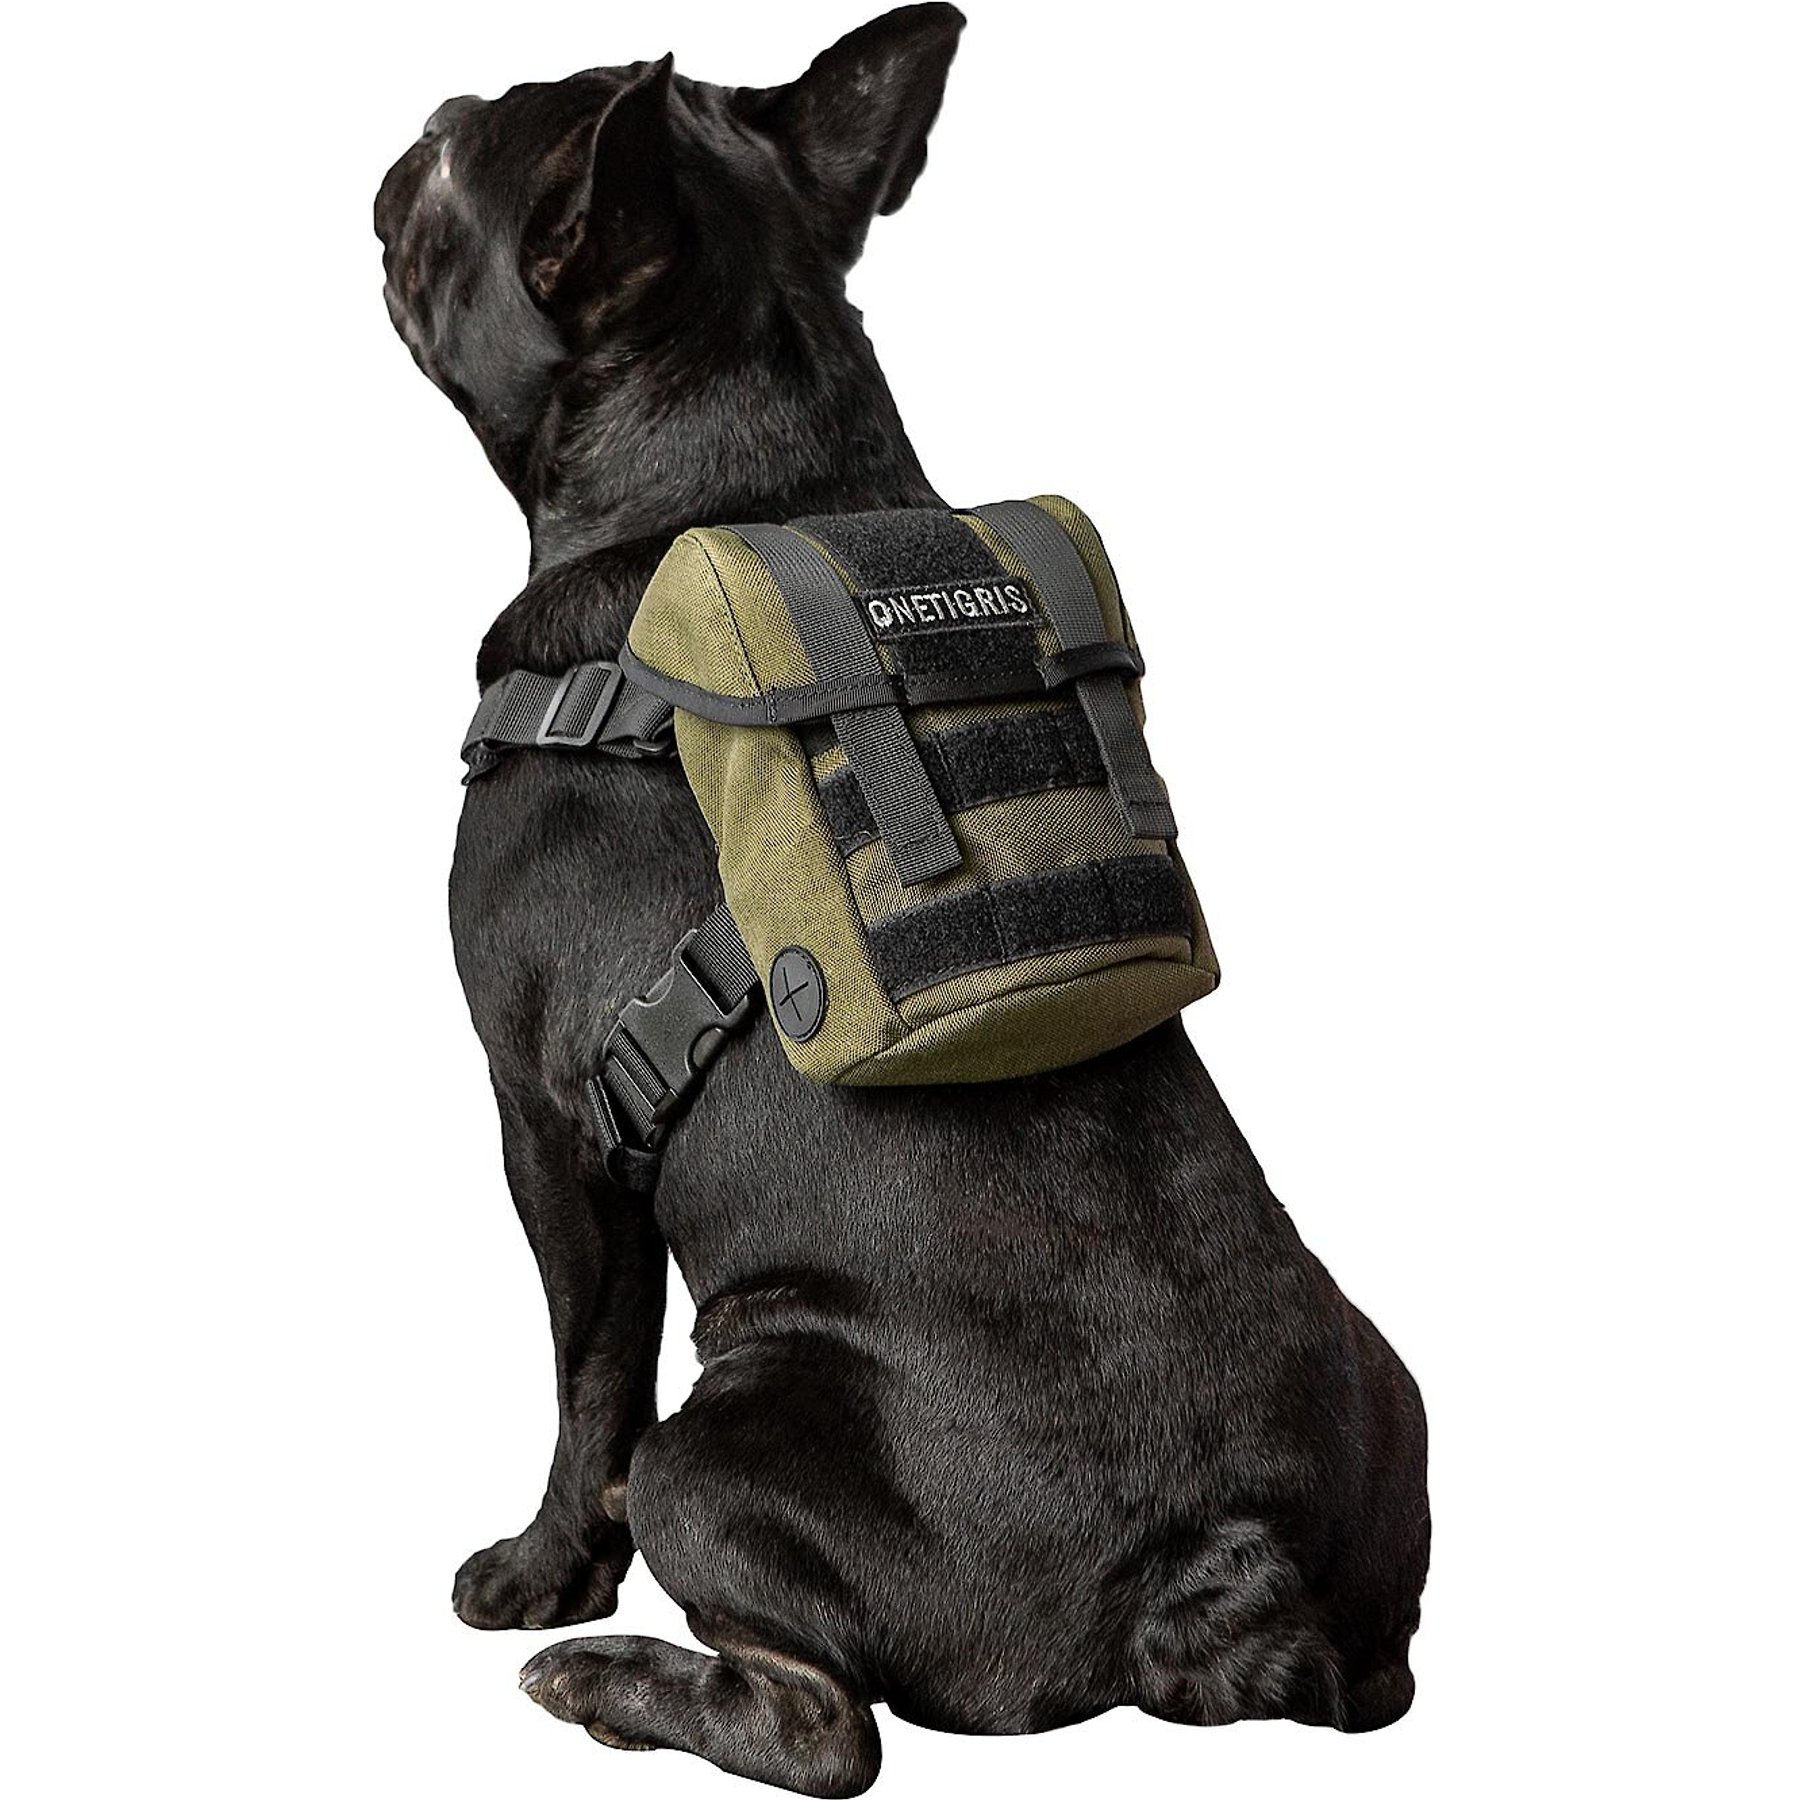 Poochi Monogram Dog Backpack  Frenchie Accessory for Outings